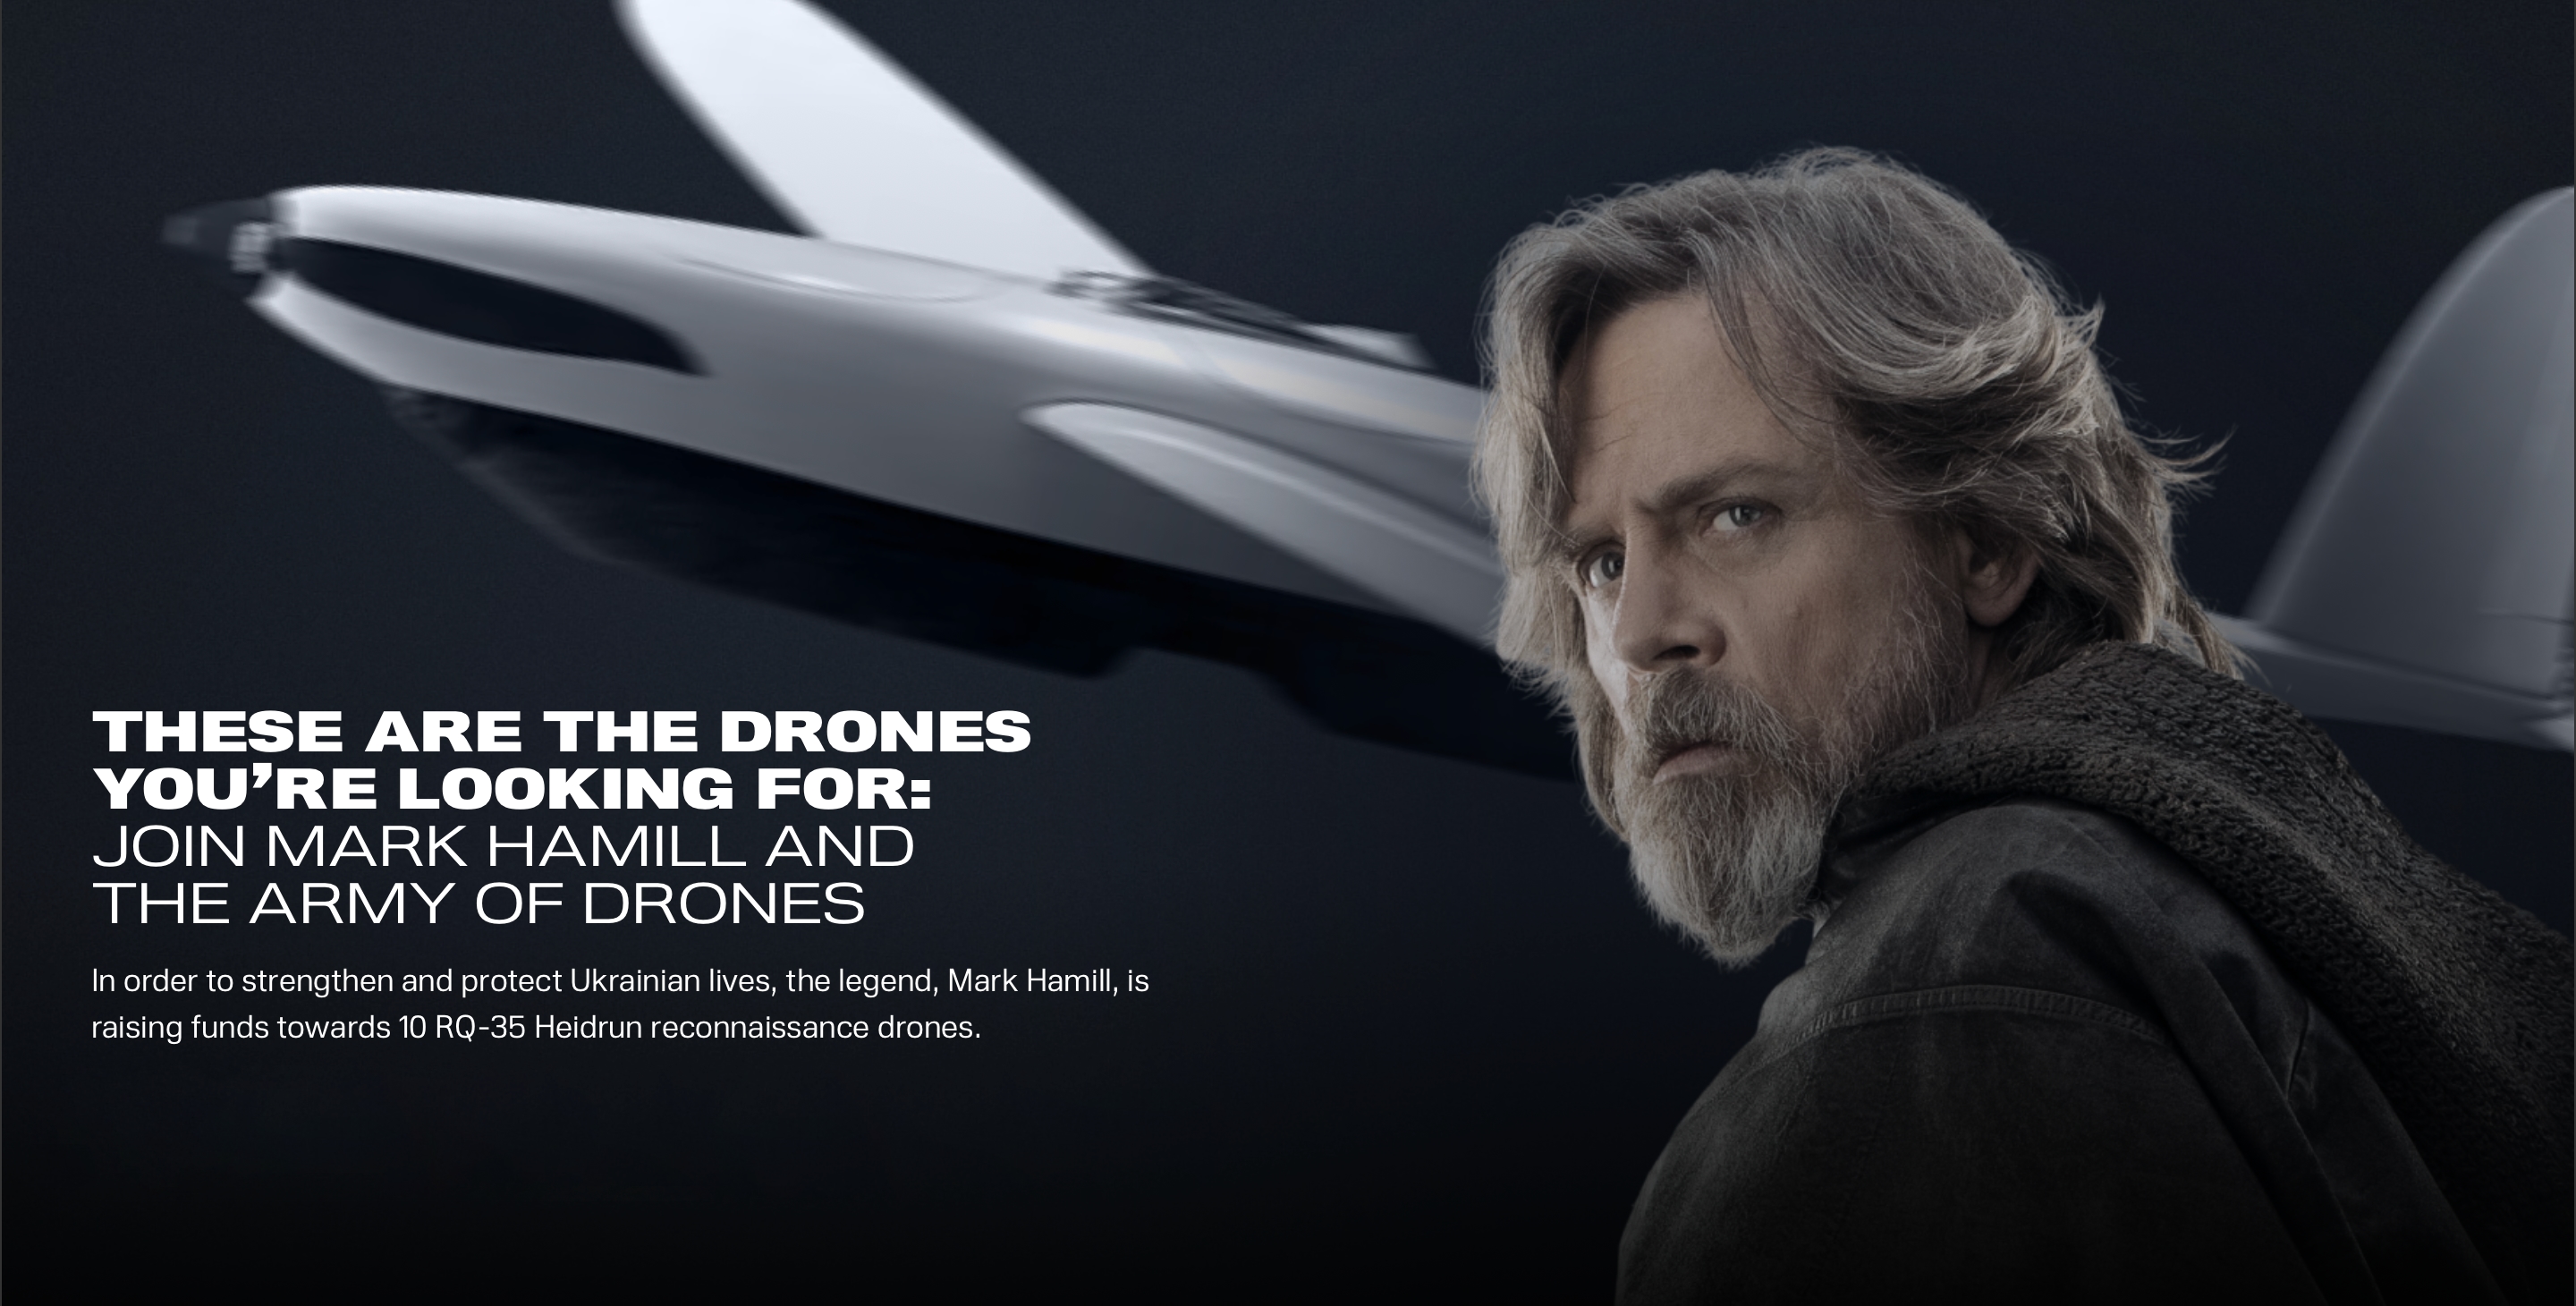 "Star Wars" actor Mark Hamill is raising money through the UNITED24 platform for the RQ-35 Heidrun reconnaissance UAVs for the AFU